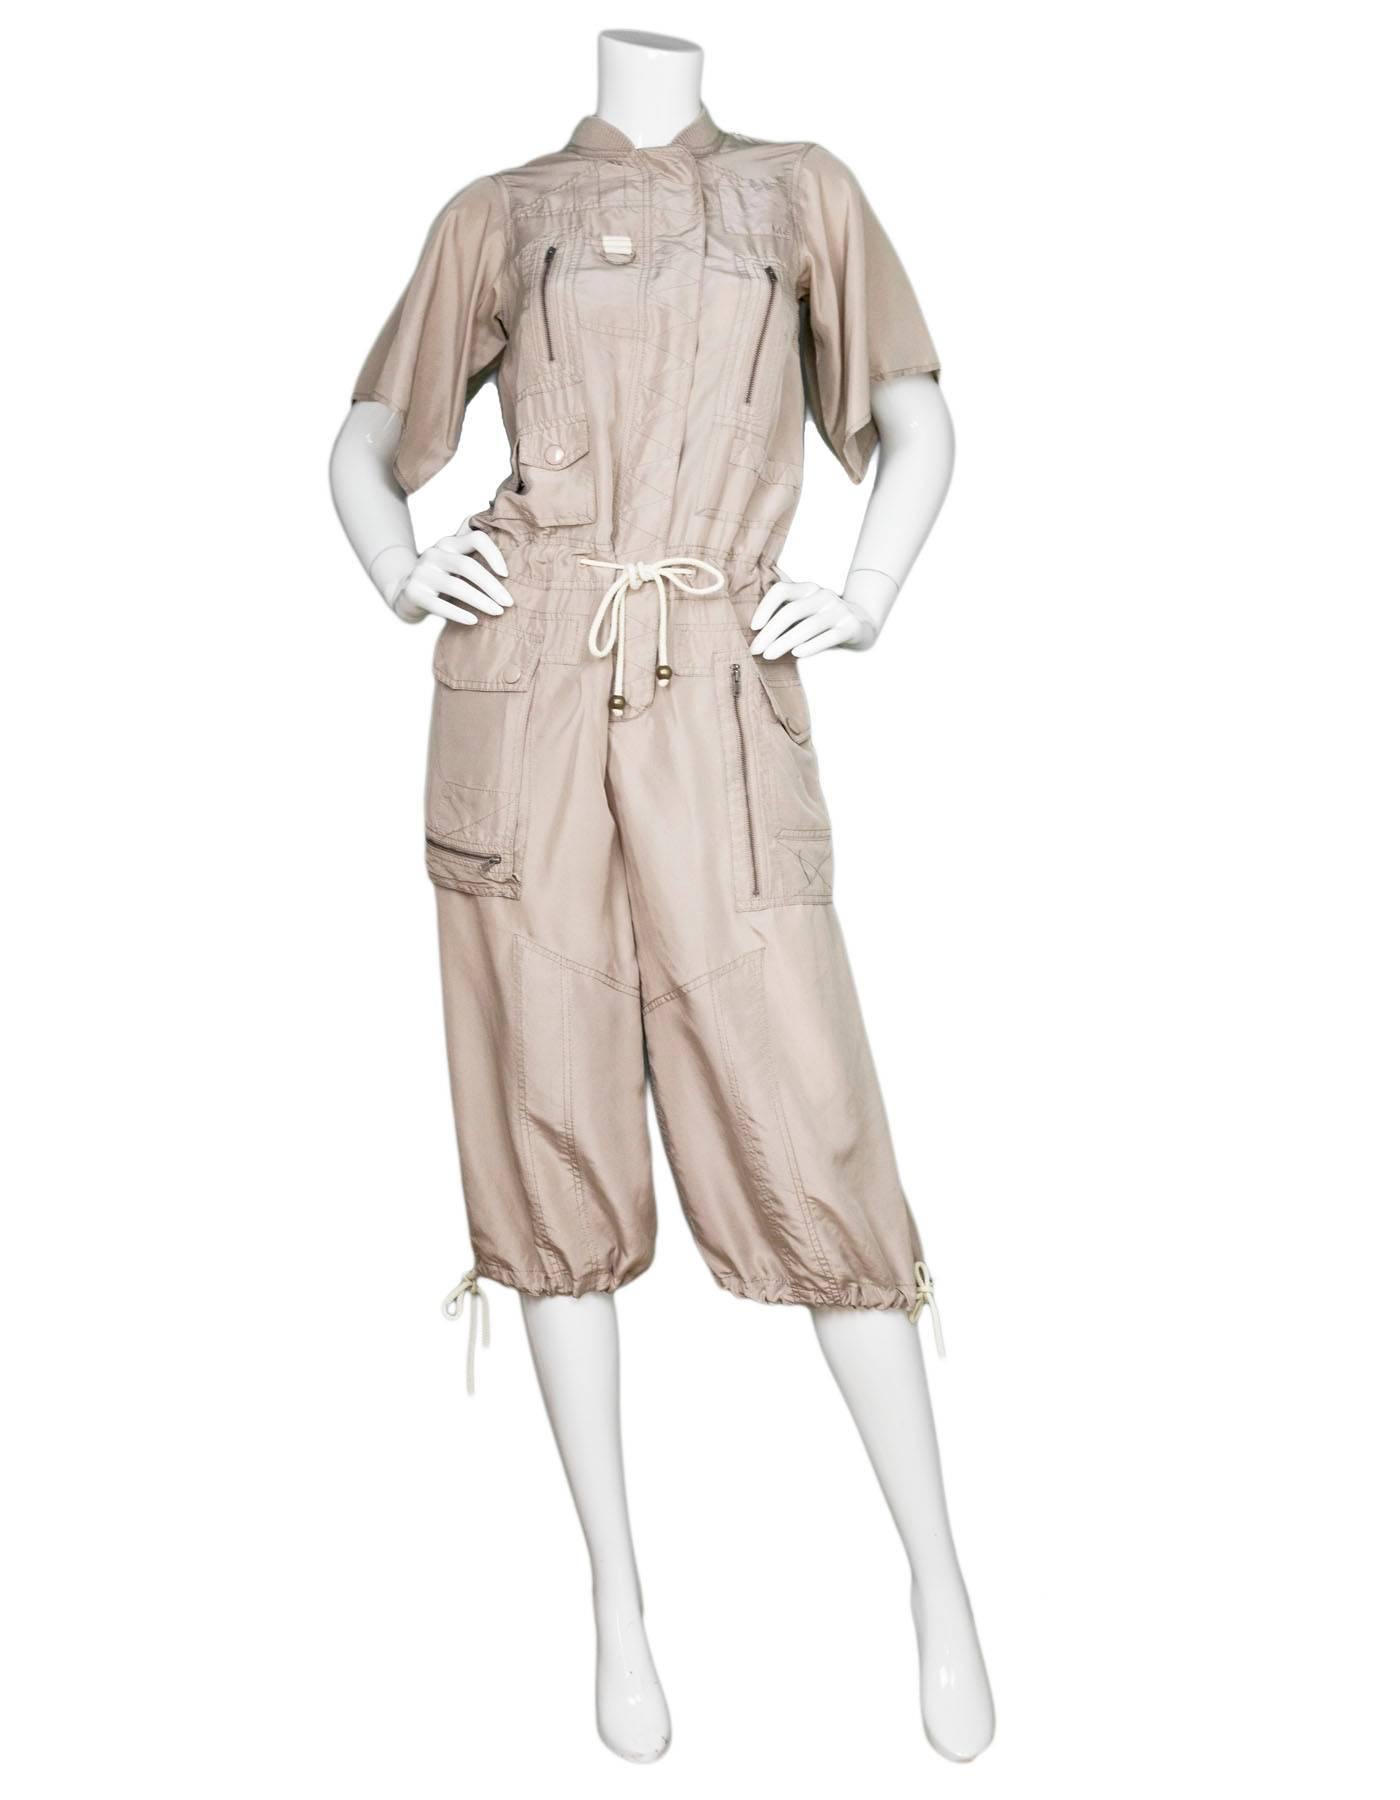 Marc Jacobs Taupe Silk Jumpsuit Sz XS

Made In: China
Color: Taupe
Composition: 100% silk
Closure/Opening: Front button closure
Exterior Pockets: Zip and button pockets throughout
Overall Condition: Very good pre-owned condition, some stains at